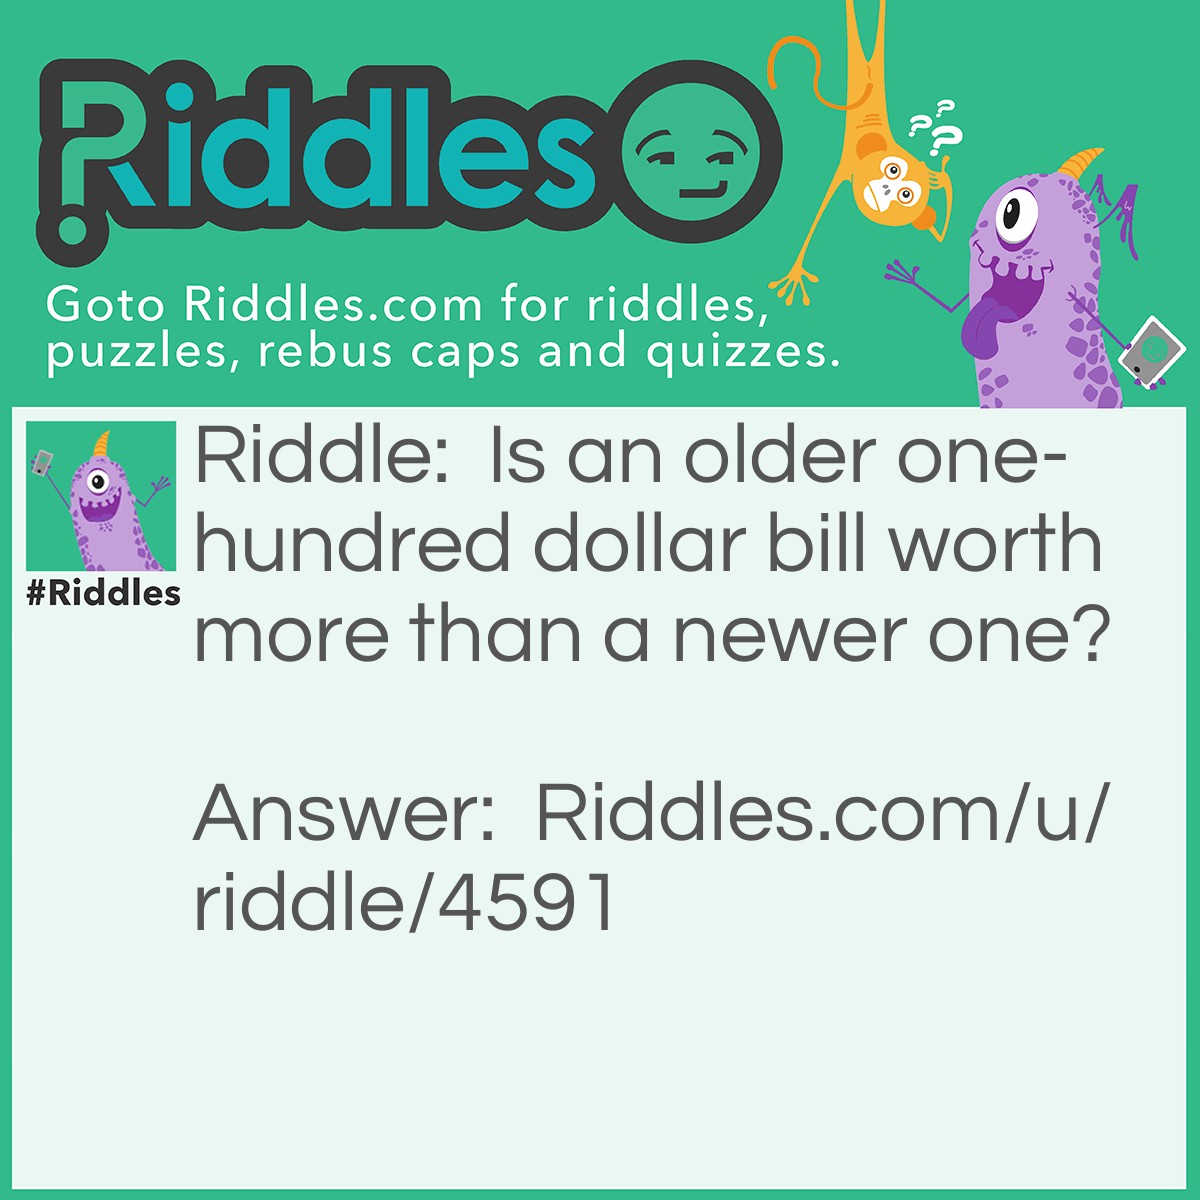 Riddle: Is an older one-hundred dollar bill worth more than a newer one? Answer: Of course it is. A $100 bill is worth more than a $1 bill (newer One)